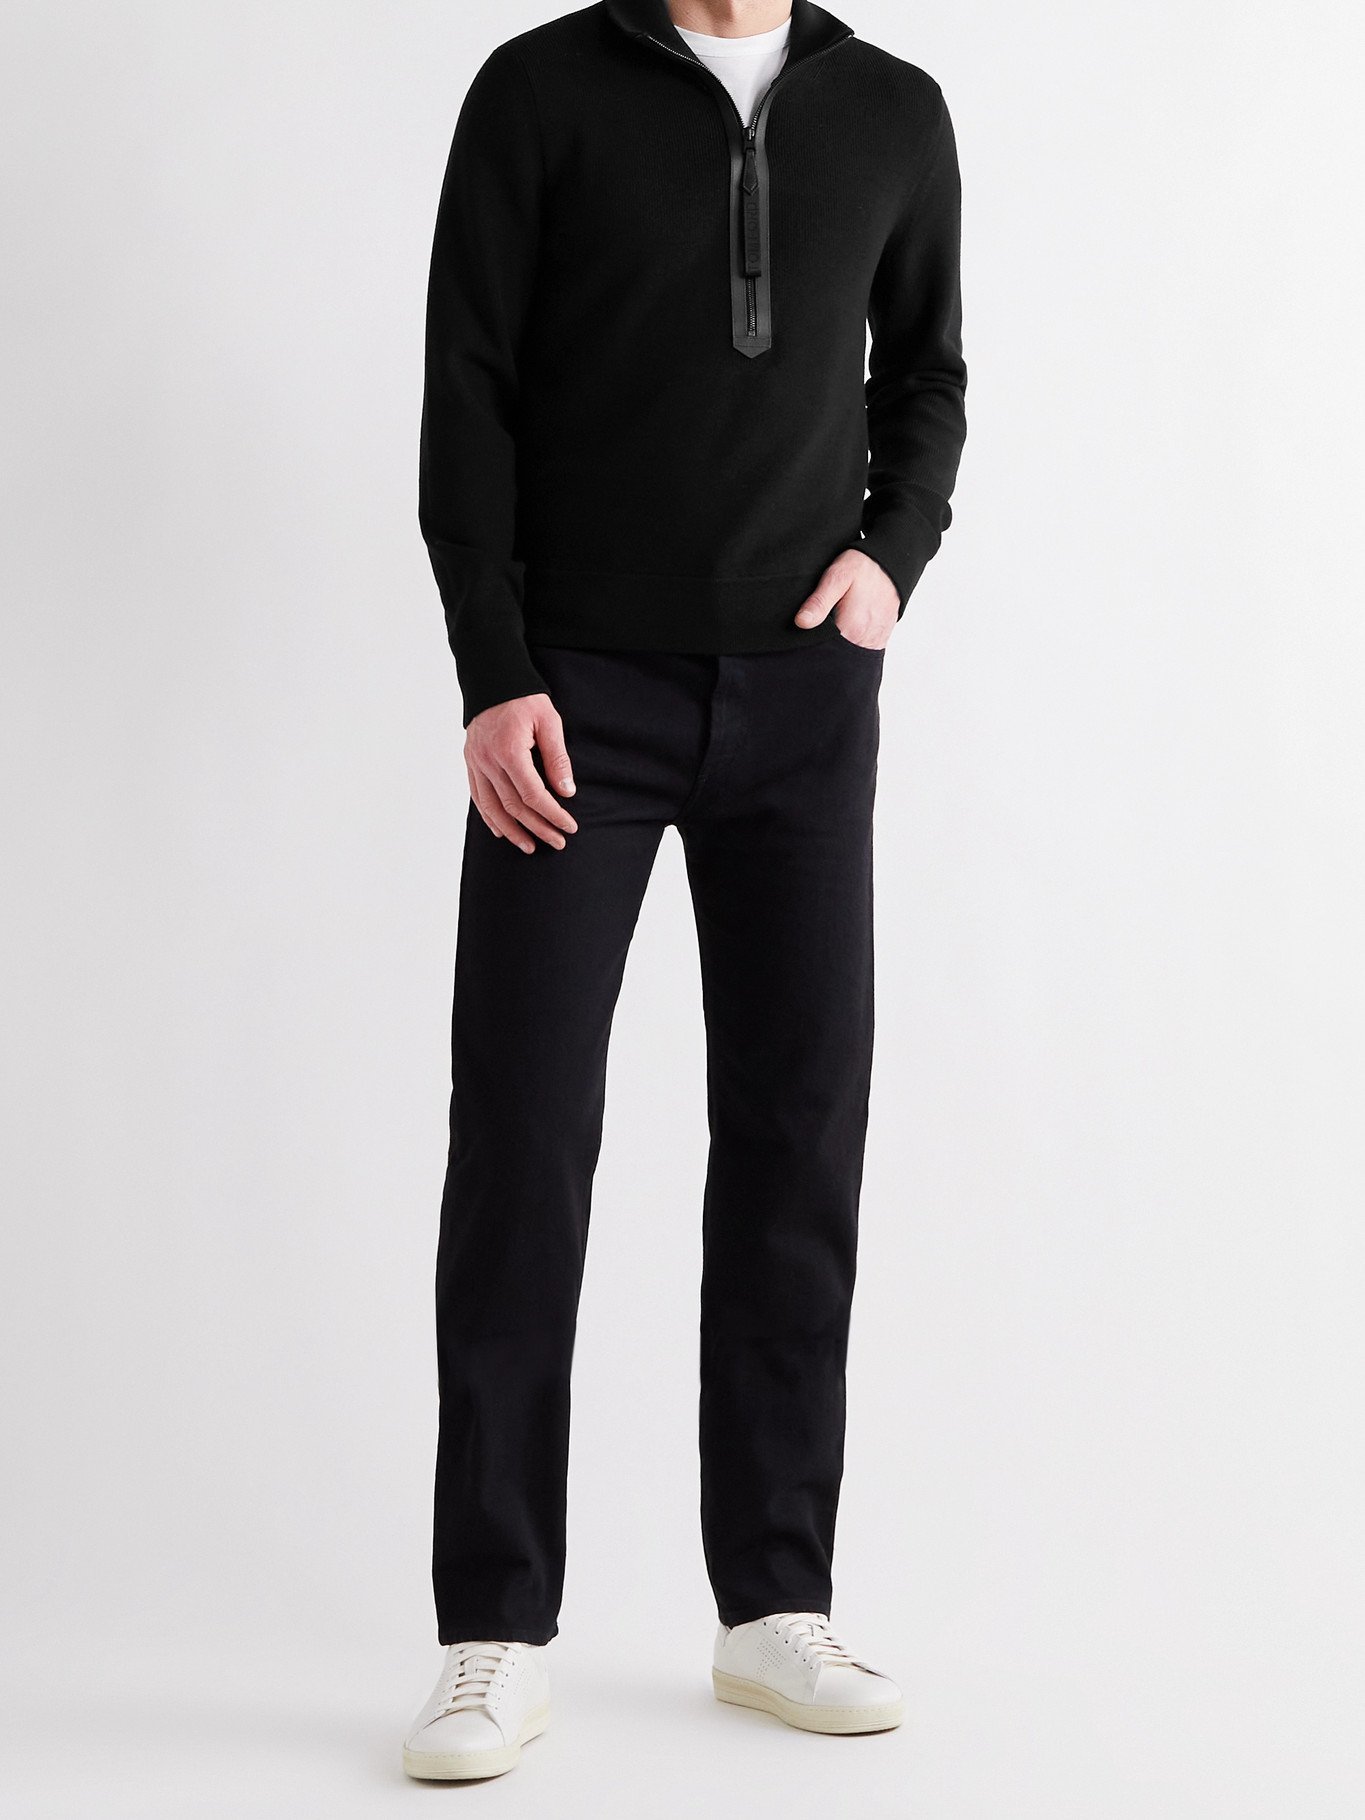 TOM FORD - Leather-Trimmed Merino Wool Half-Zip Sweater - Black TOM FORD